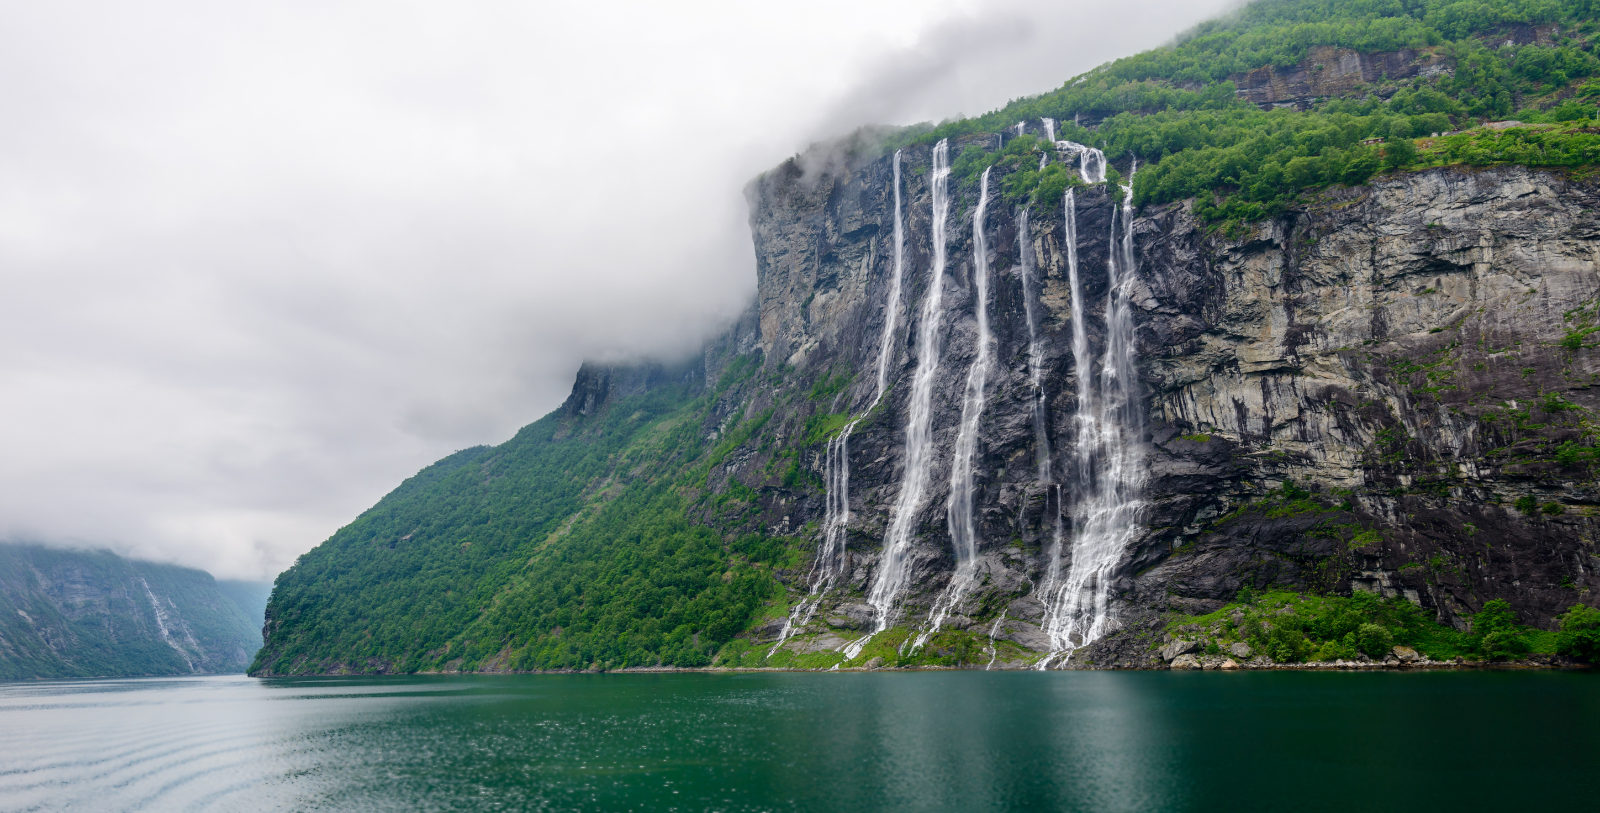 Experience the awe-inspiring power and breathtaking beauty of two of the Geirangerfjord’s most notable waterfalls, the Seven Sisters and the Suitor, during a fjord cruise or kayak excursion.